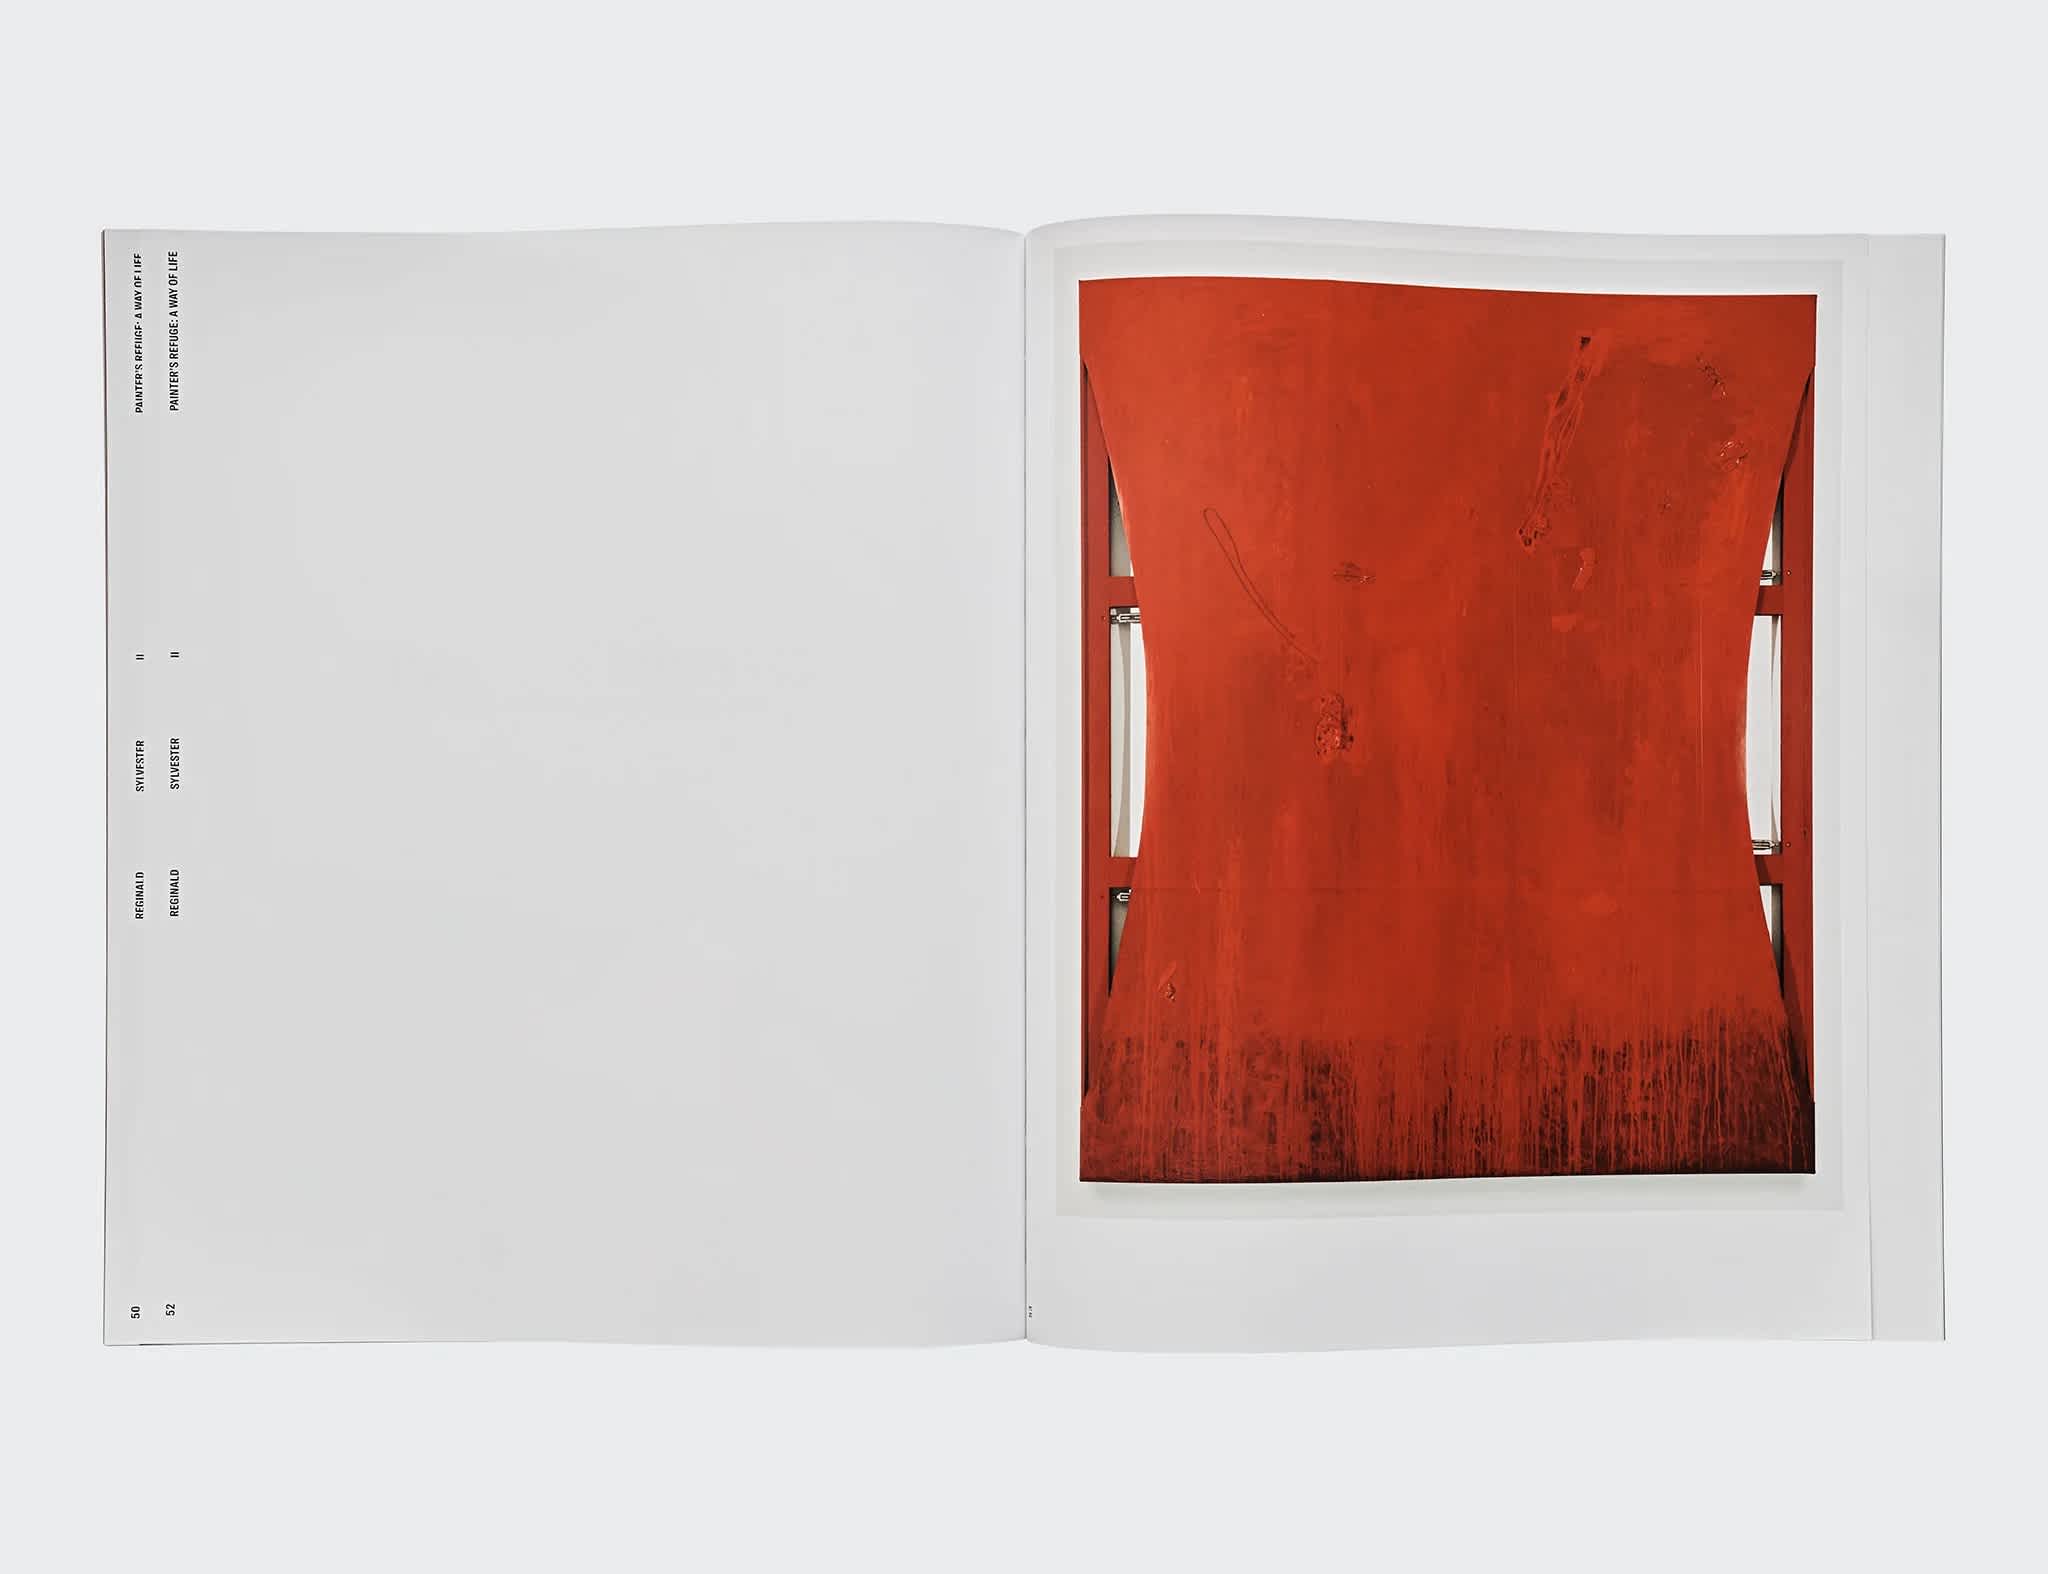 Interior of a book imposed on a white background. The left page is white with the book's title, page number and artist, printed in small black letters on the outside edge. The right page features a red, abstract painting by the artist Reginald Sylvester II.